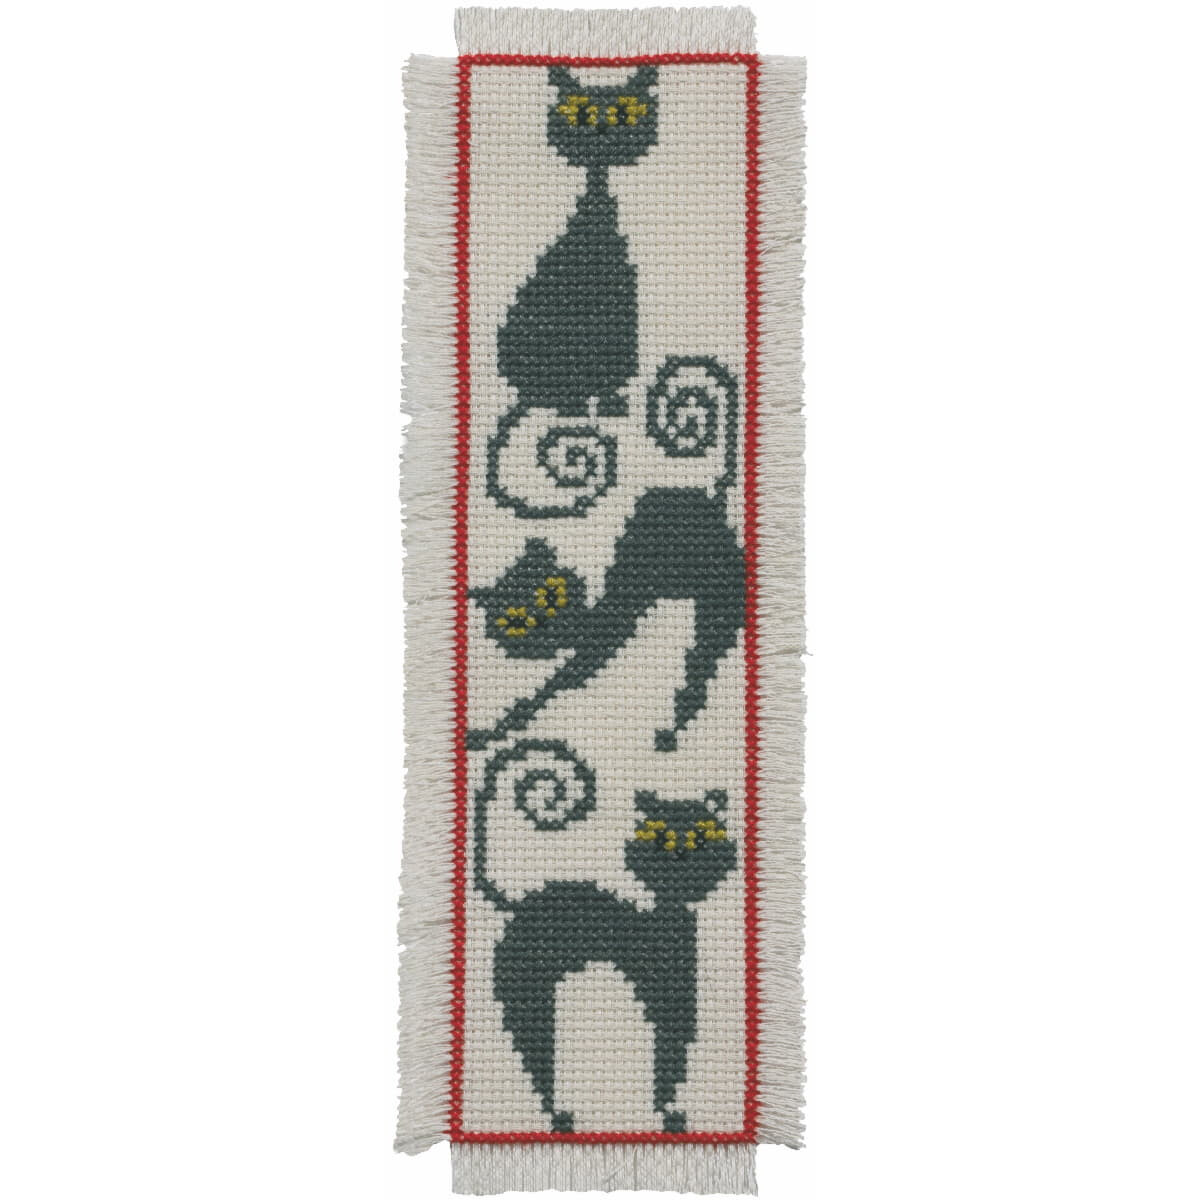 Permin counted cross stitch kit "Bookmark Cat",...